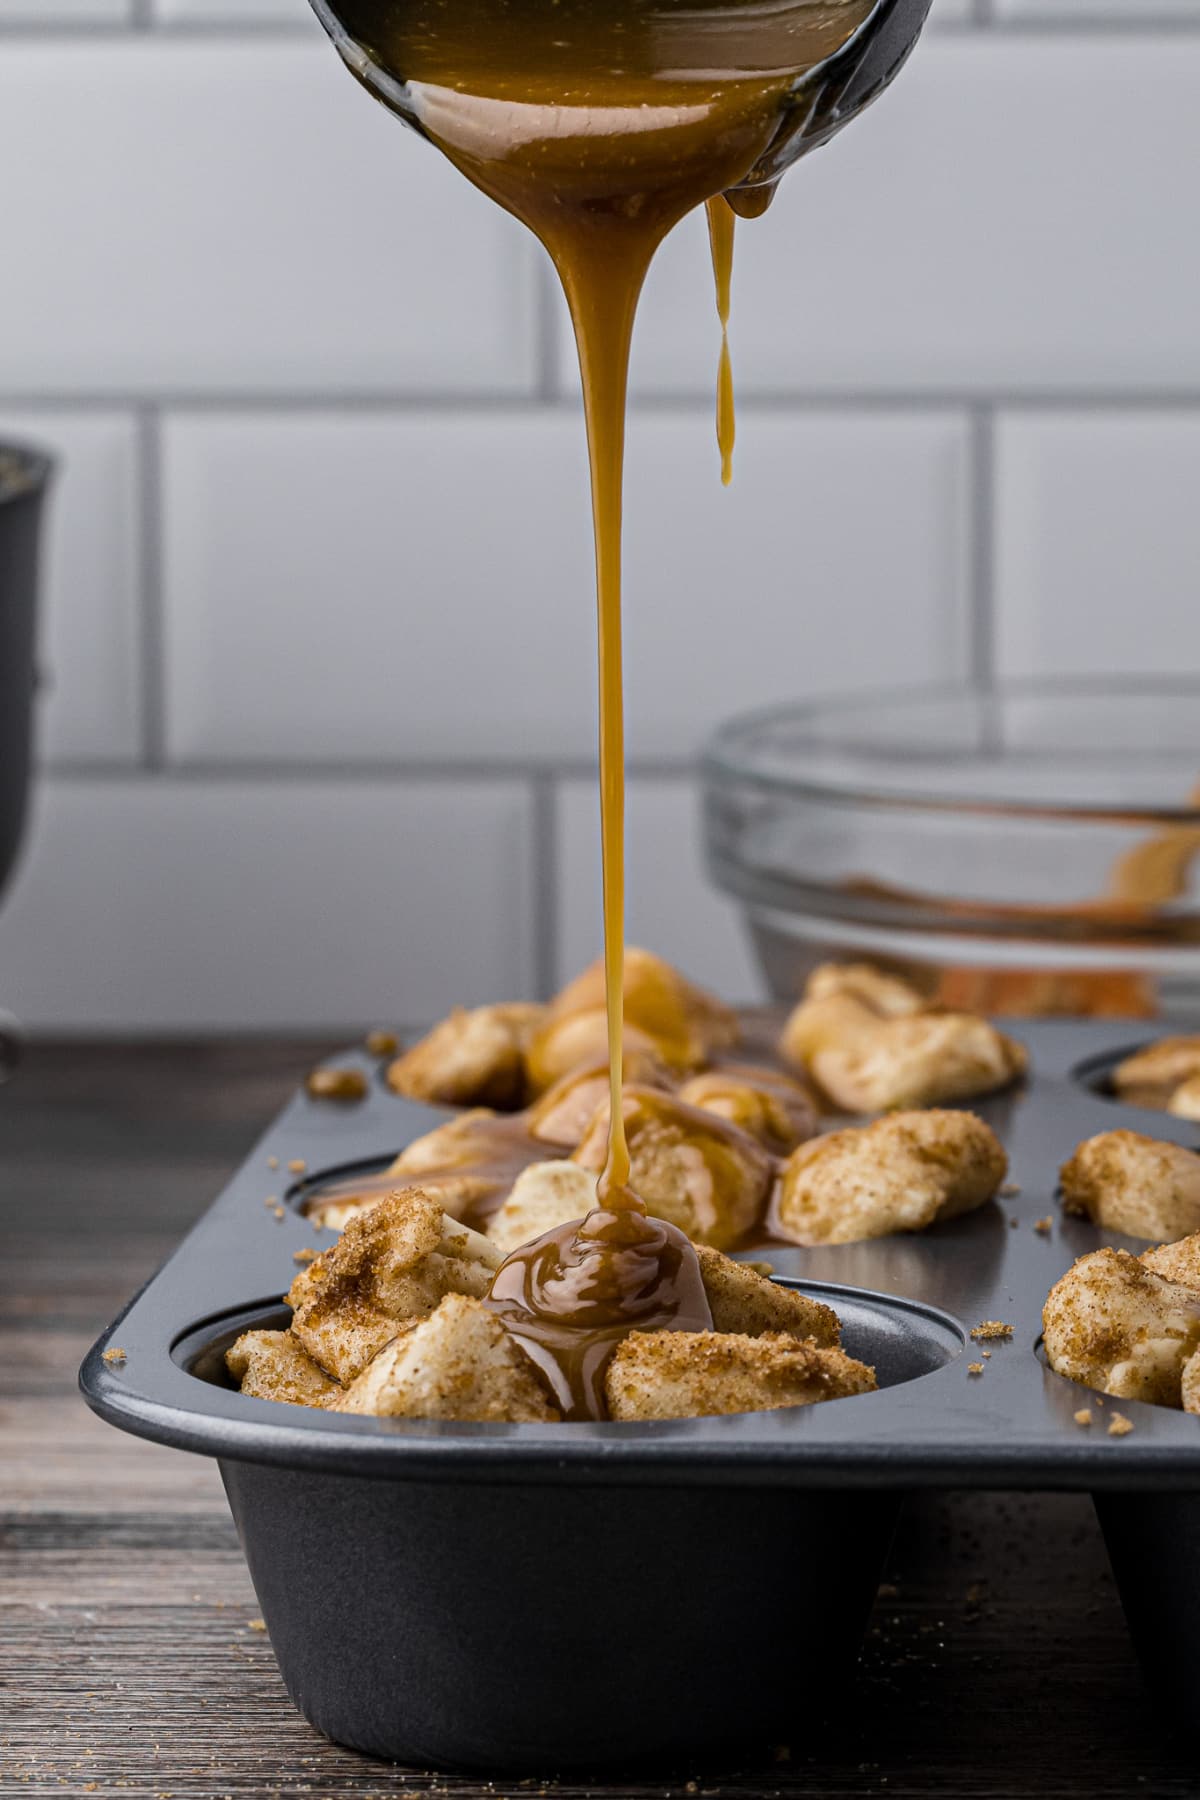 Caramel sauce pouring over bread dough in a muffin tin